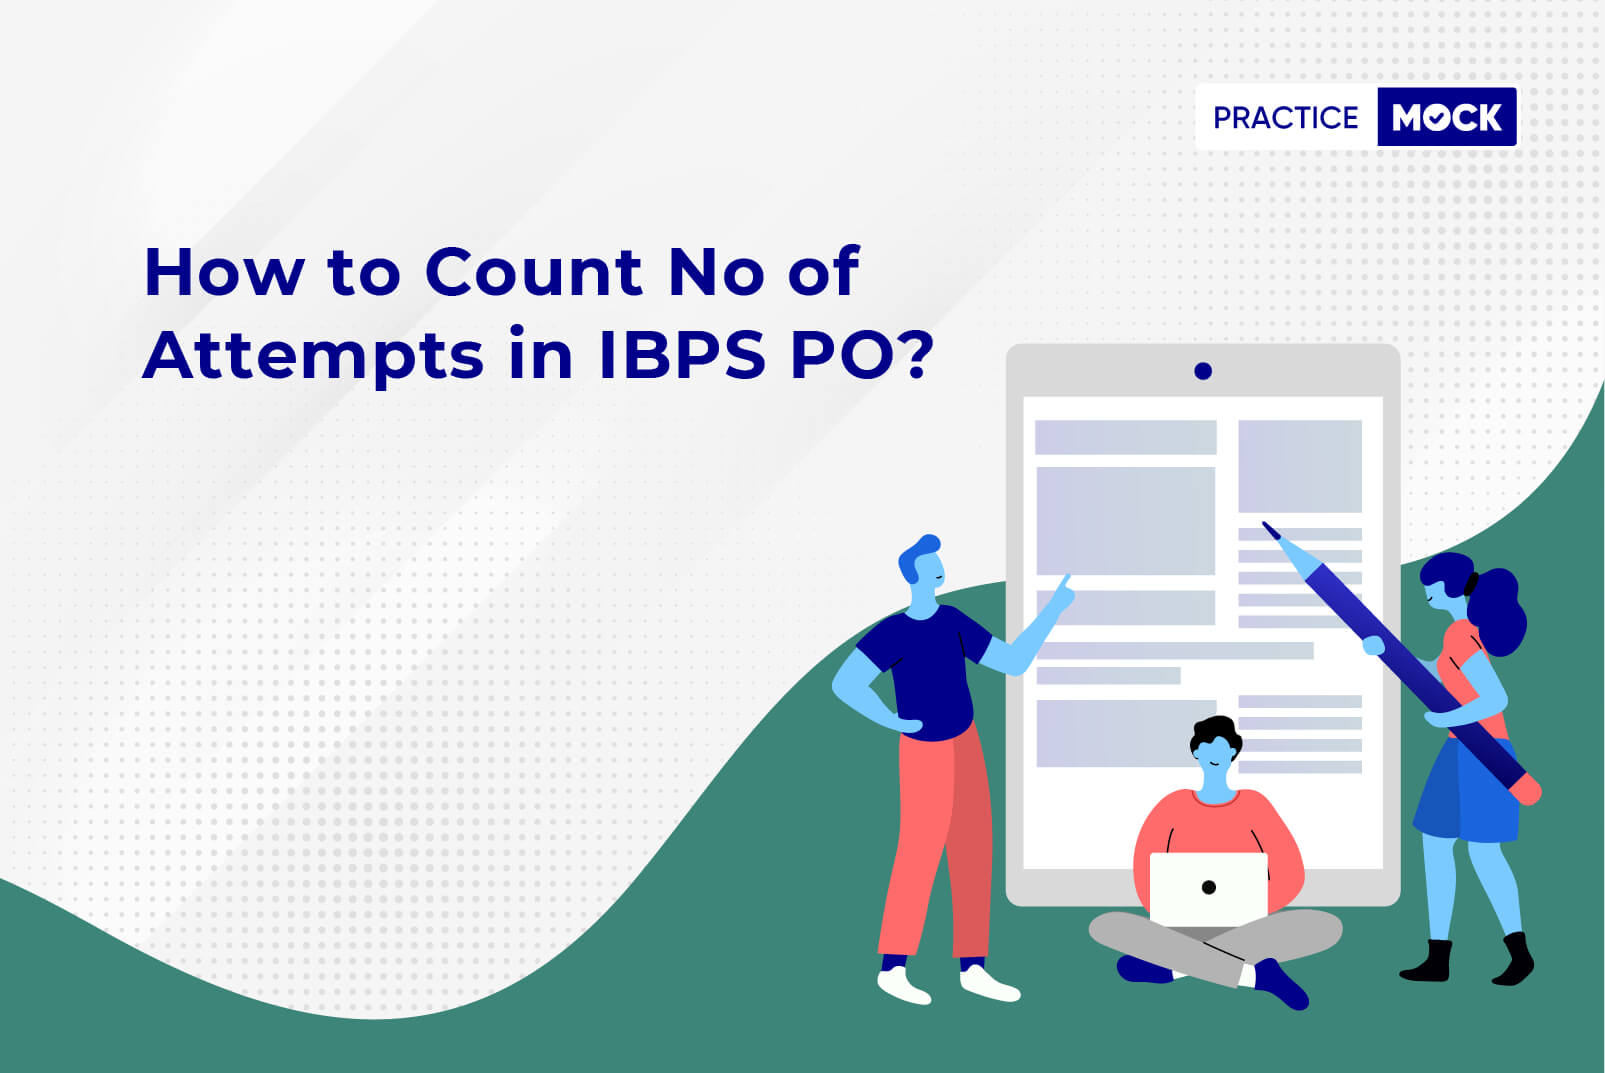 How to count no of attempts in IBPS PO